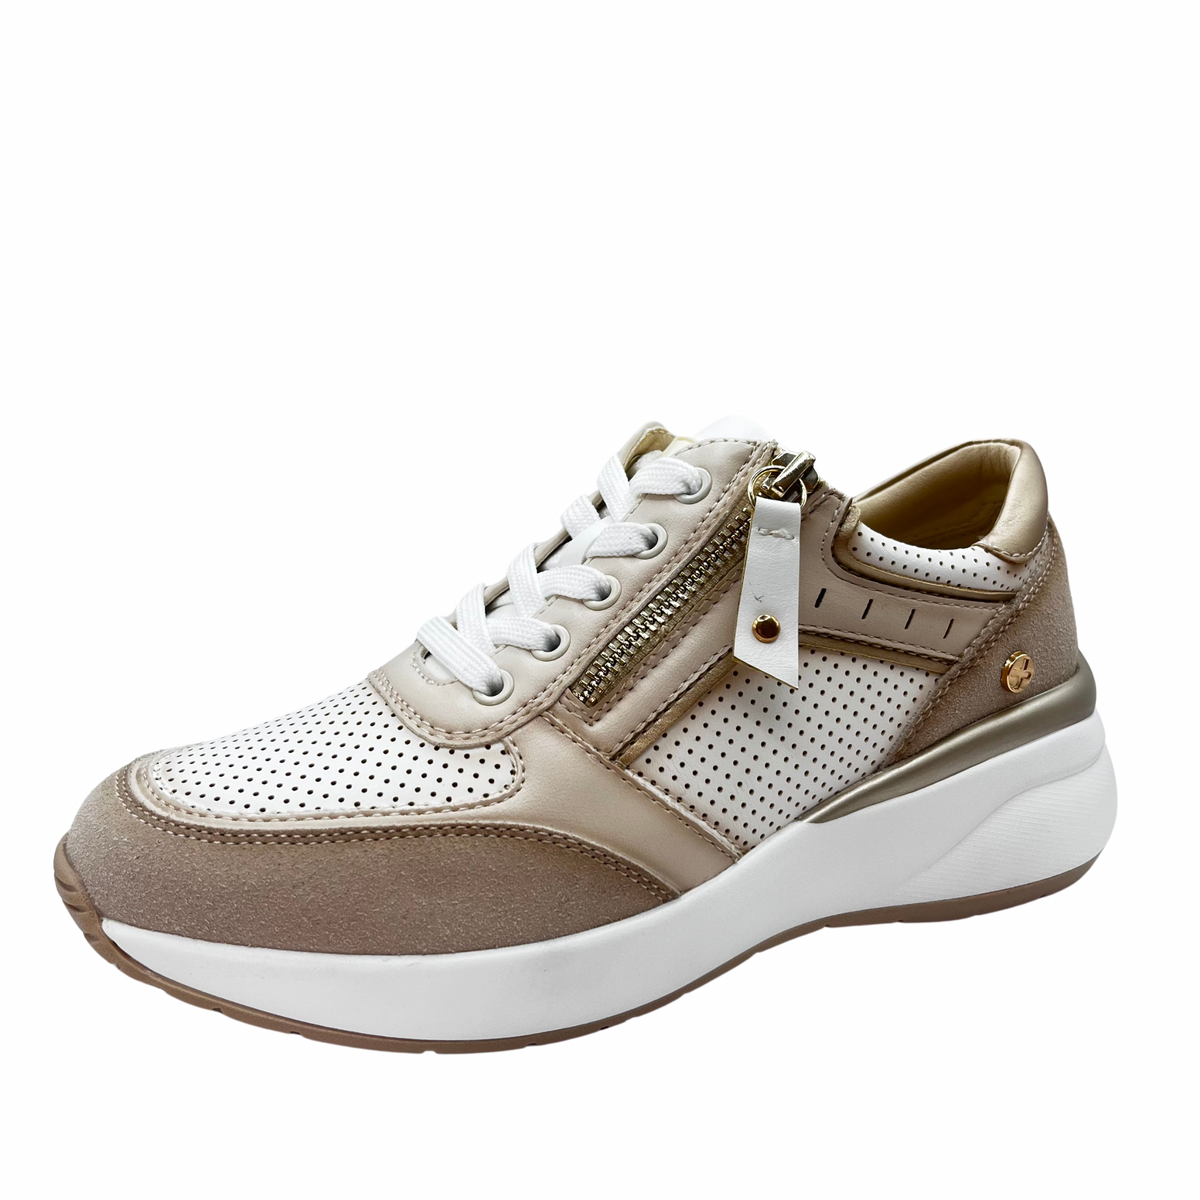 Xti Champange and Cream Trainers with Perforated Detail